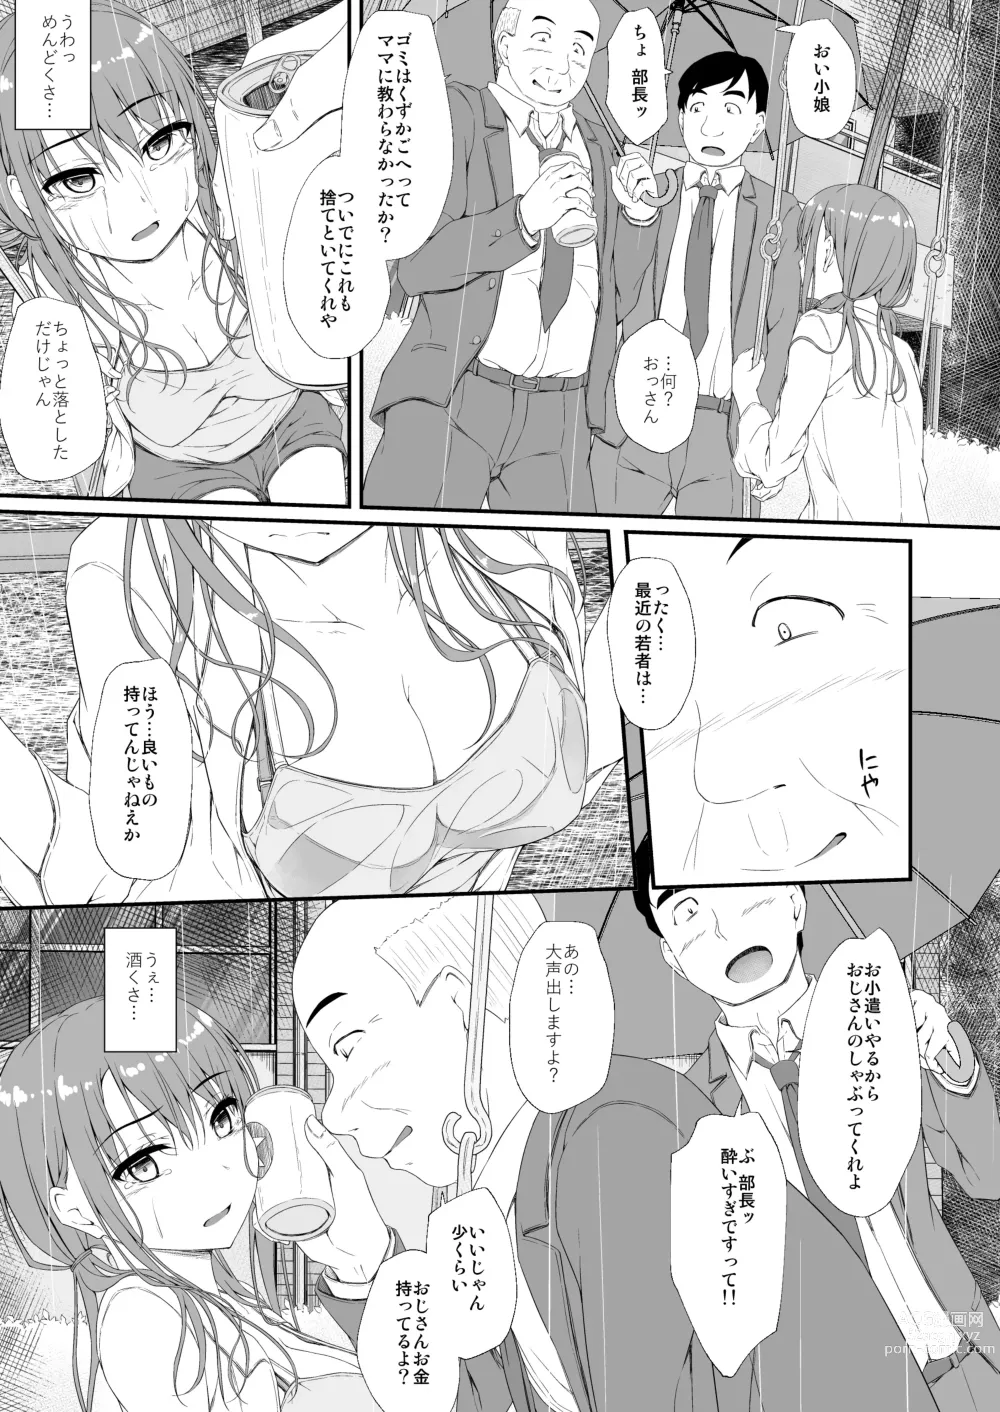 Page 6 of doujinshi Re:Temptation 6